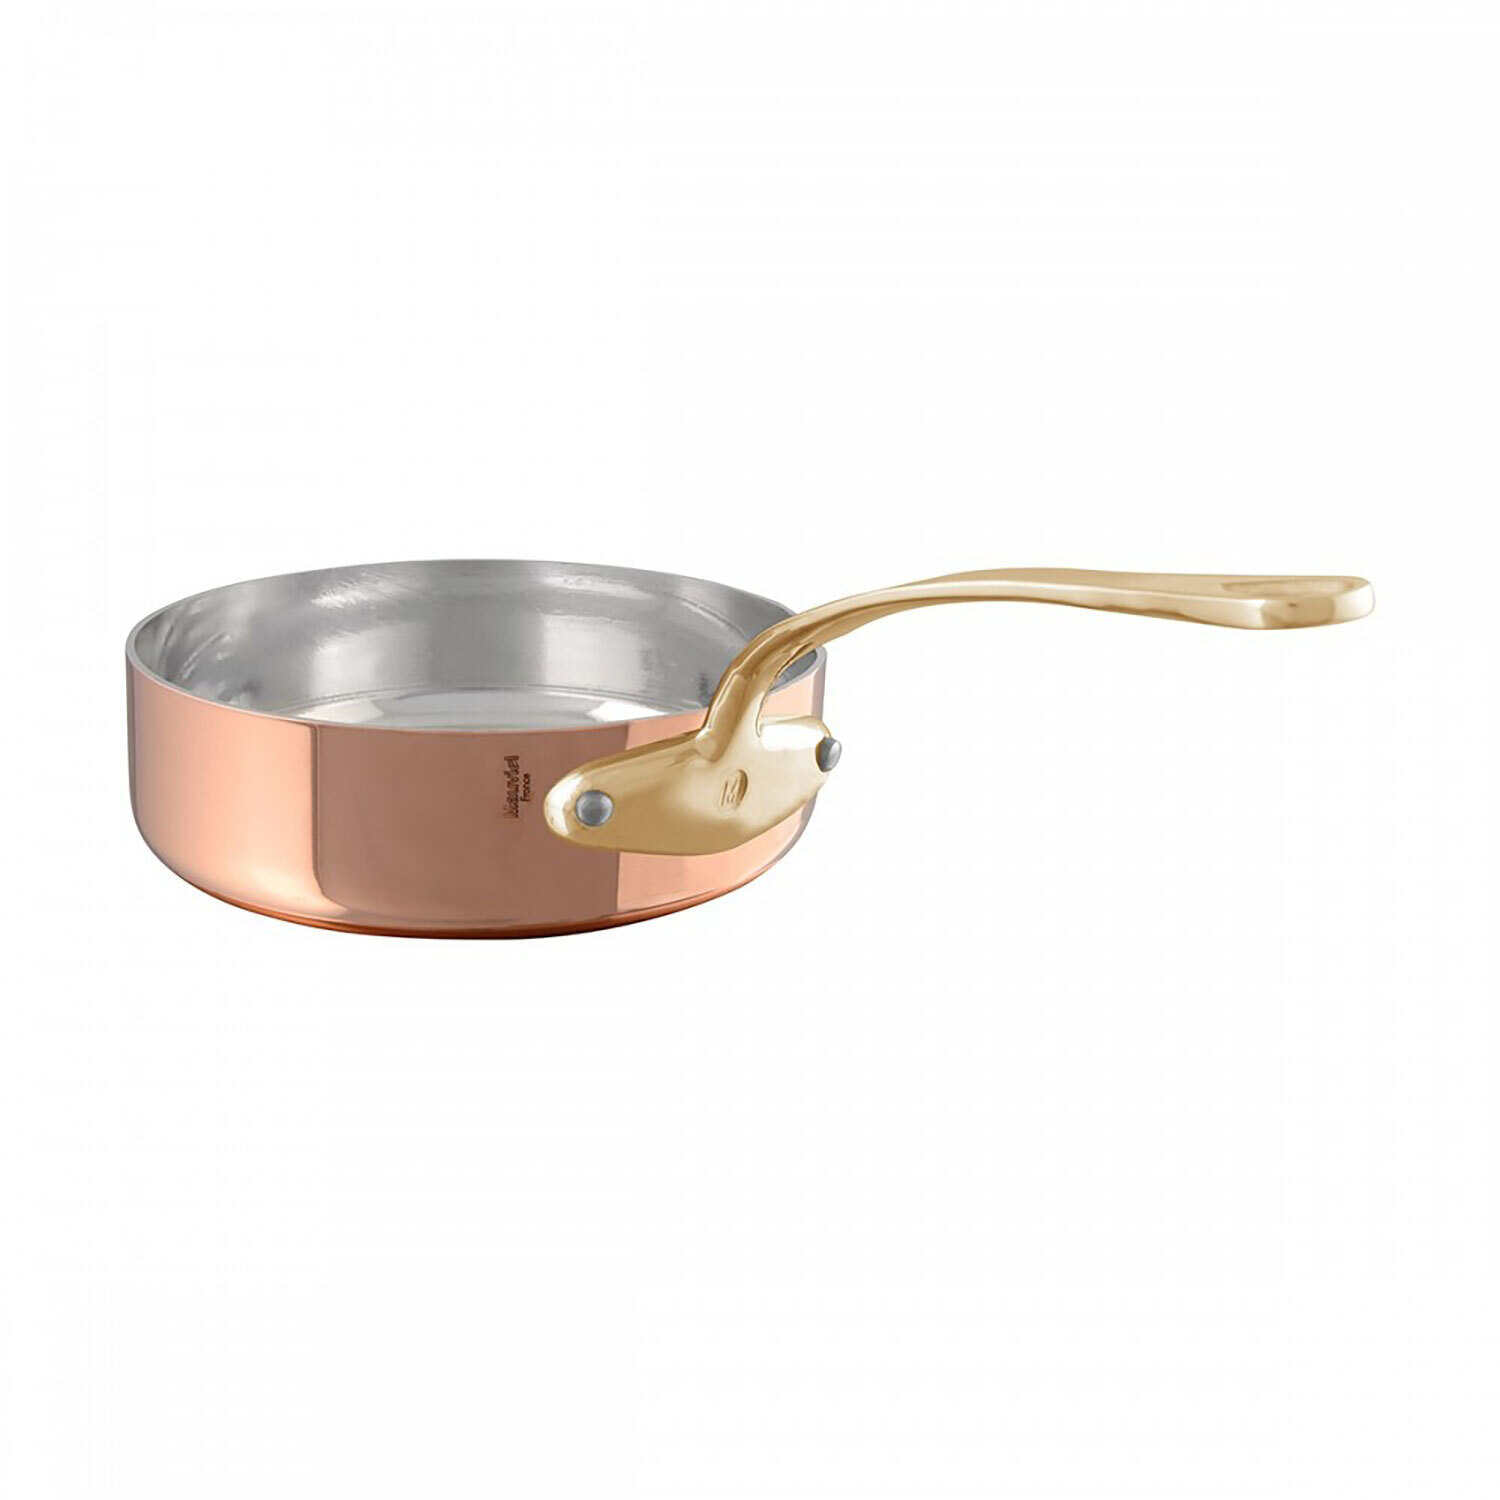 Mauviel M'Tradition Copper Splayed Saute Pan withbronze Handles And Tin Inside 20cm 284524